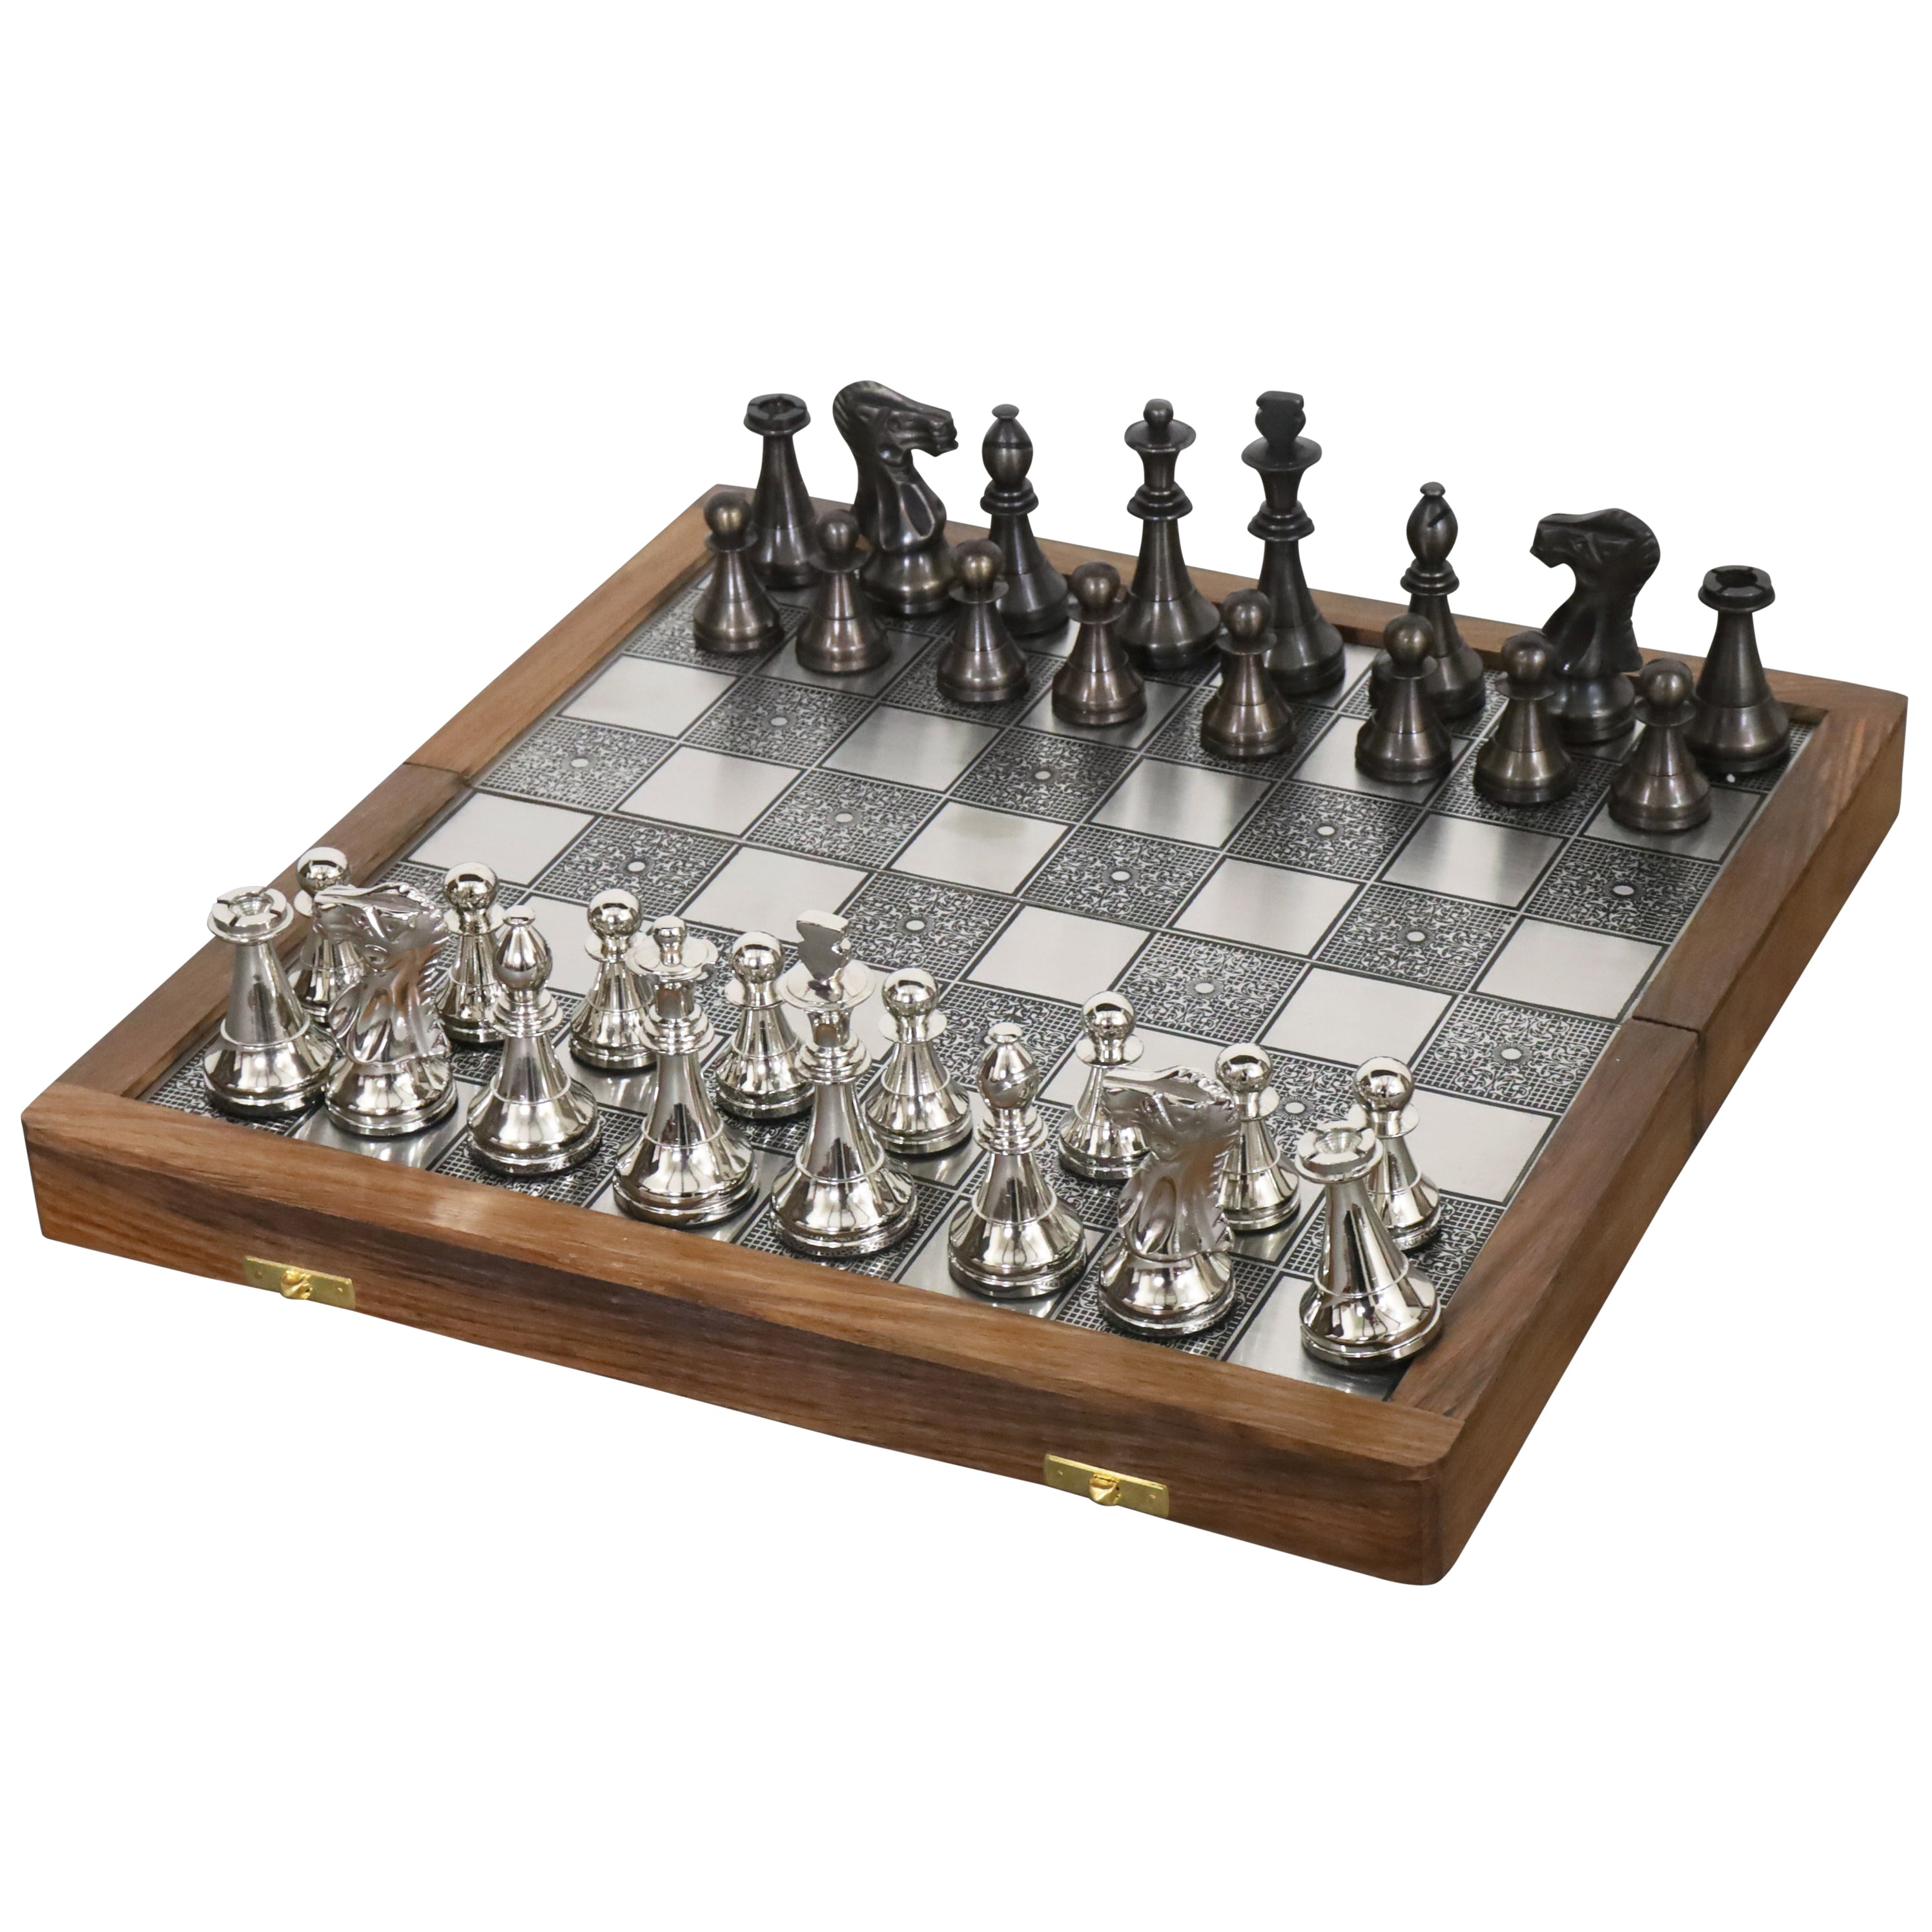 Deluxe Series Brass Metal Luxury Chess Pieces & Board Set